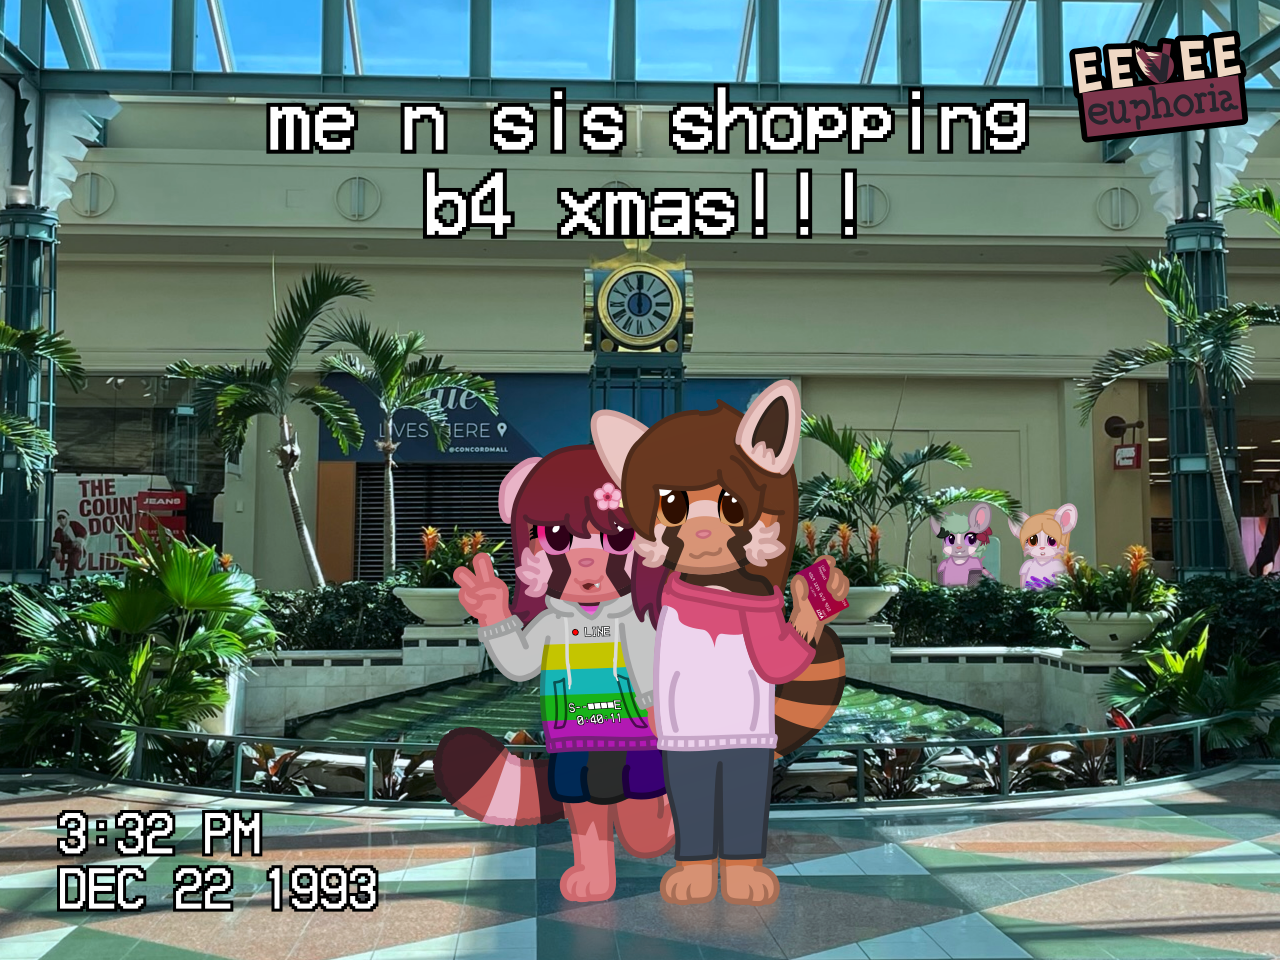 two red panda sisters are standing in front of the center of a mall, which has a water feature. one is holding up a gift card, and the other is doing a peace sign. there are two mice in the background, with one of them looking on at the red pandas. there is a visible VHS OSD, showing the date being december 22, 1993, at 3:32 P.M.